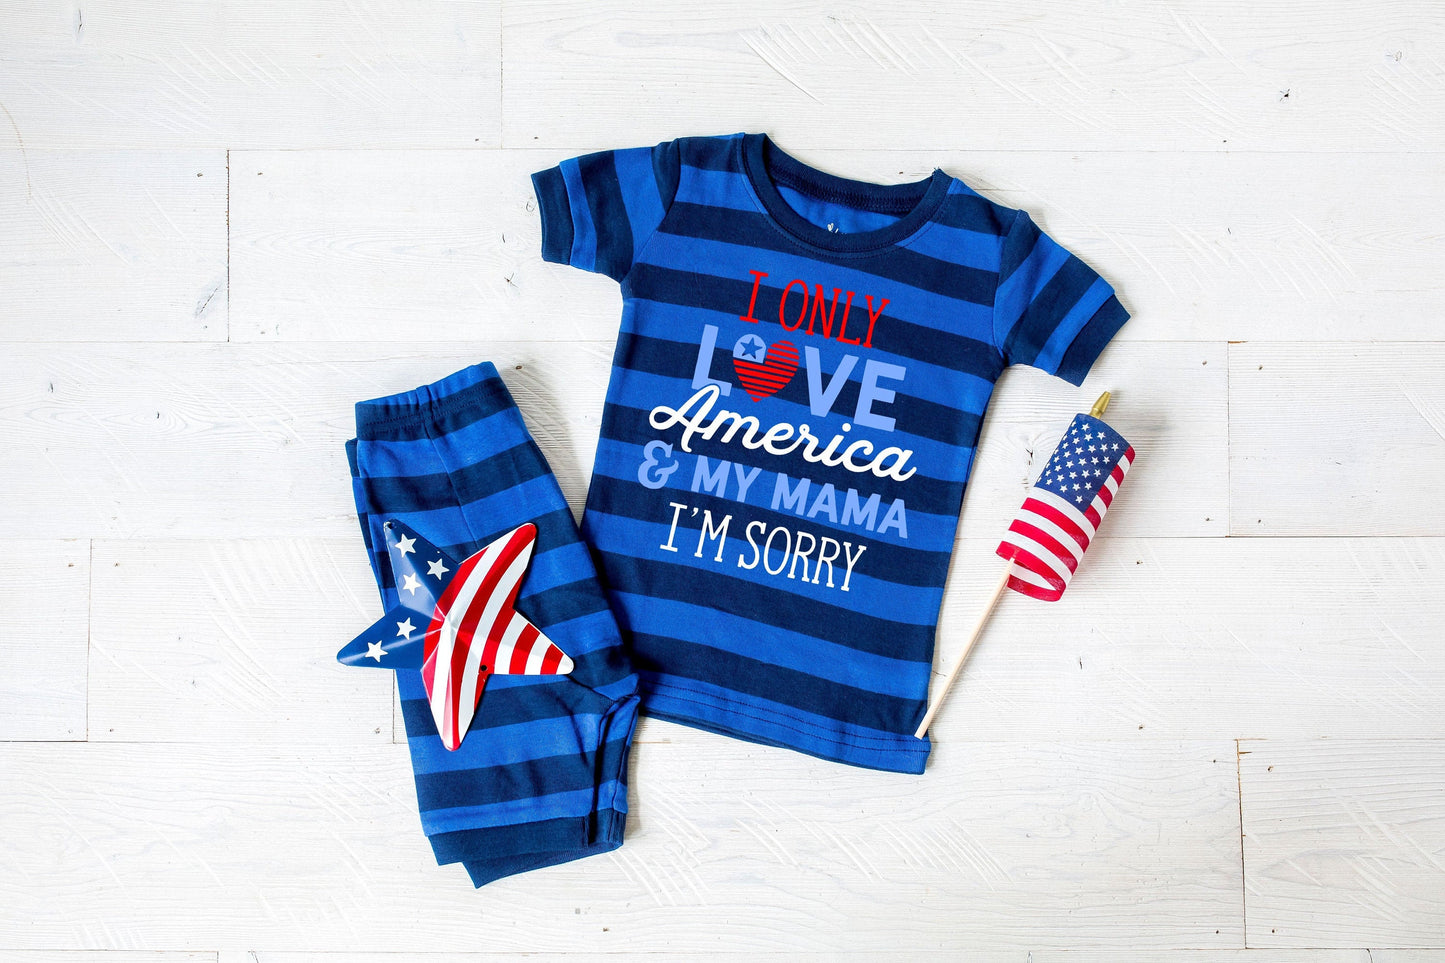 I Only Love America and My Mama I'm Sorry Blue Striped Shorts Toddler Pajamas - Kids 4th of July Pajamas - 4th of July Toddler Outfit